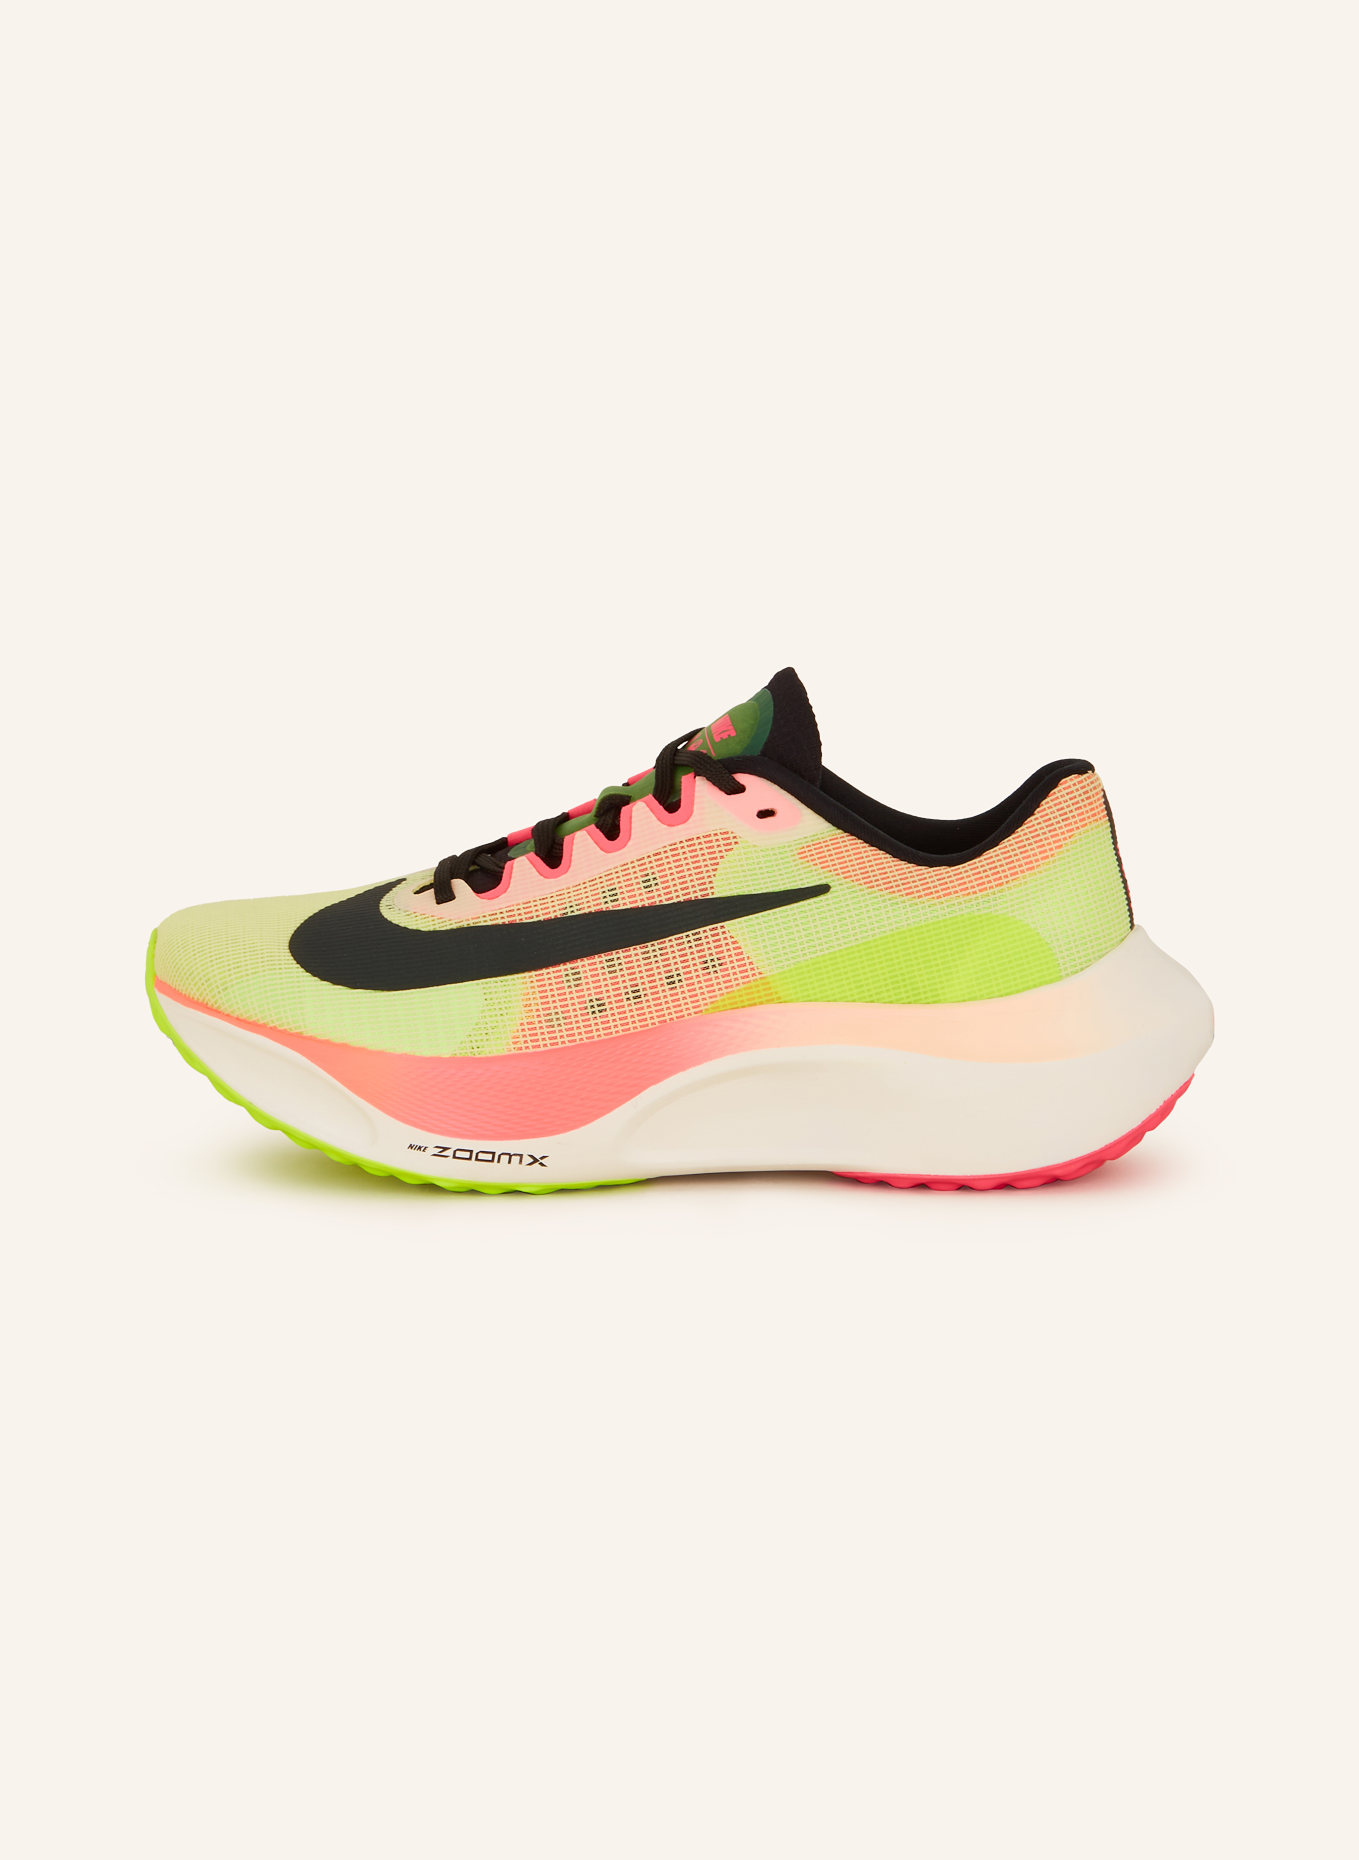 Nike Running shoes ZOOM FLY 5 PREMIUM, Color: NEON YELLOW/ NEON PINK/ BLACK (Image 4)